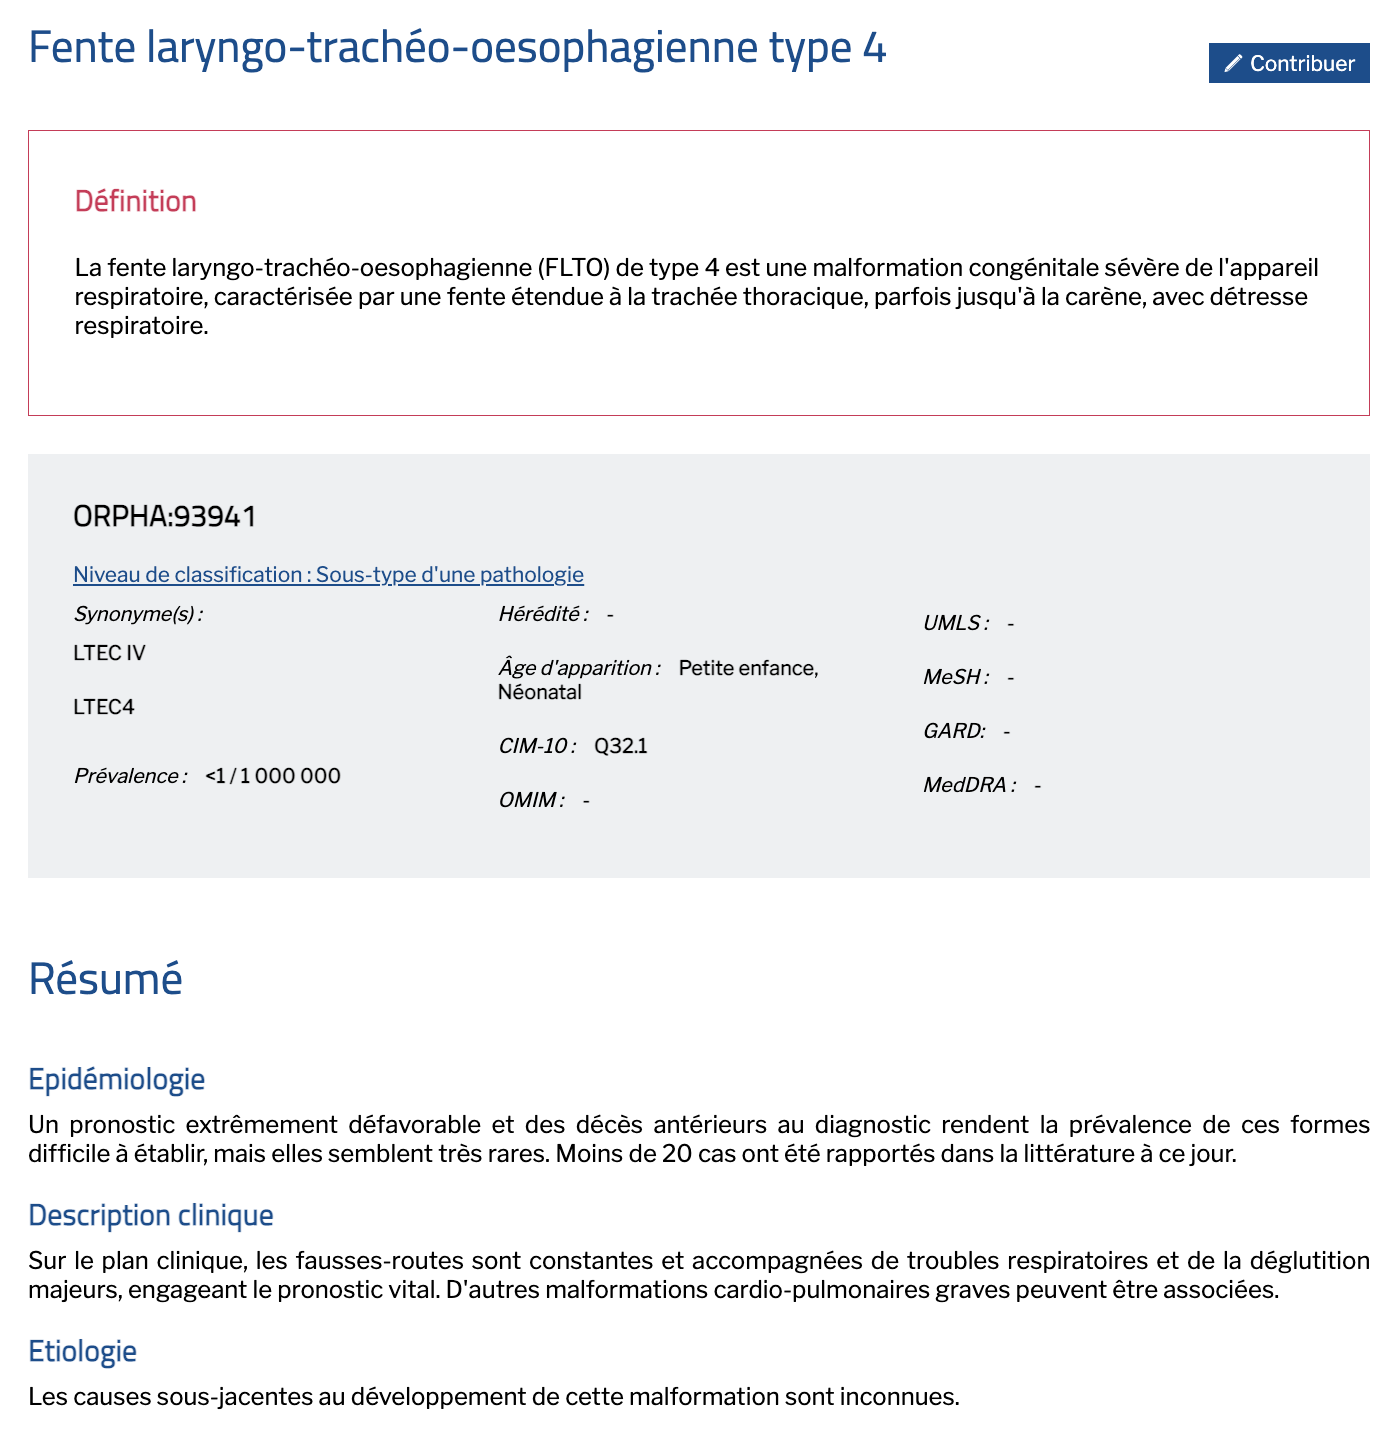 Image Site Orphanet Page FLTO  type 4